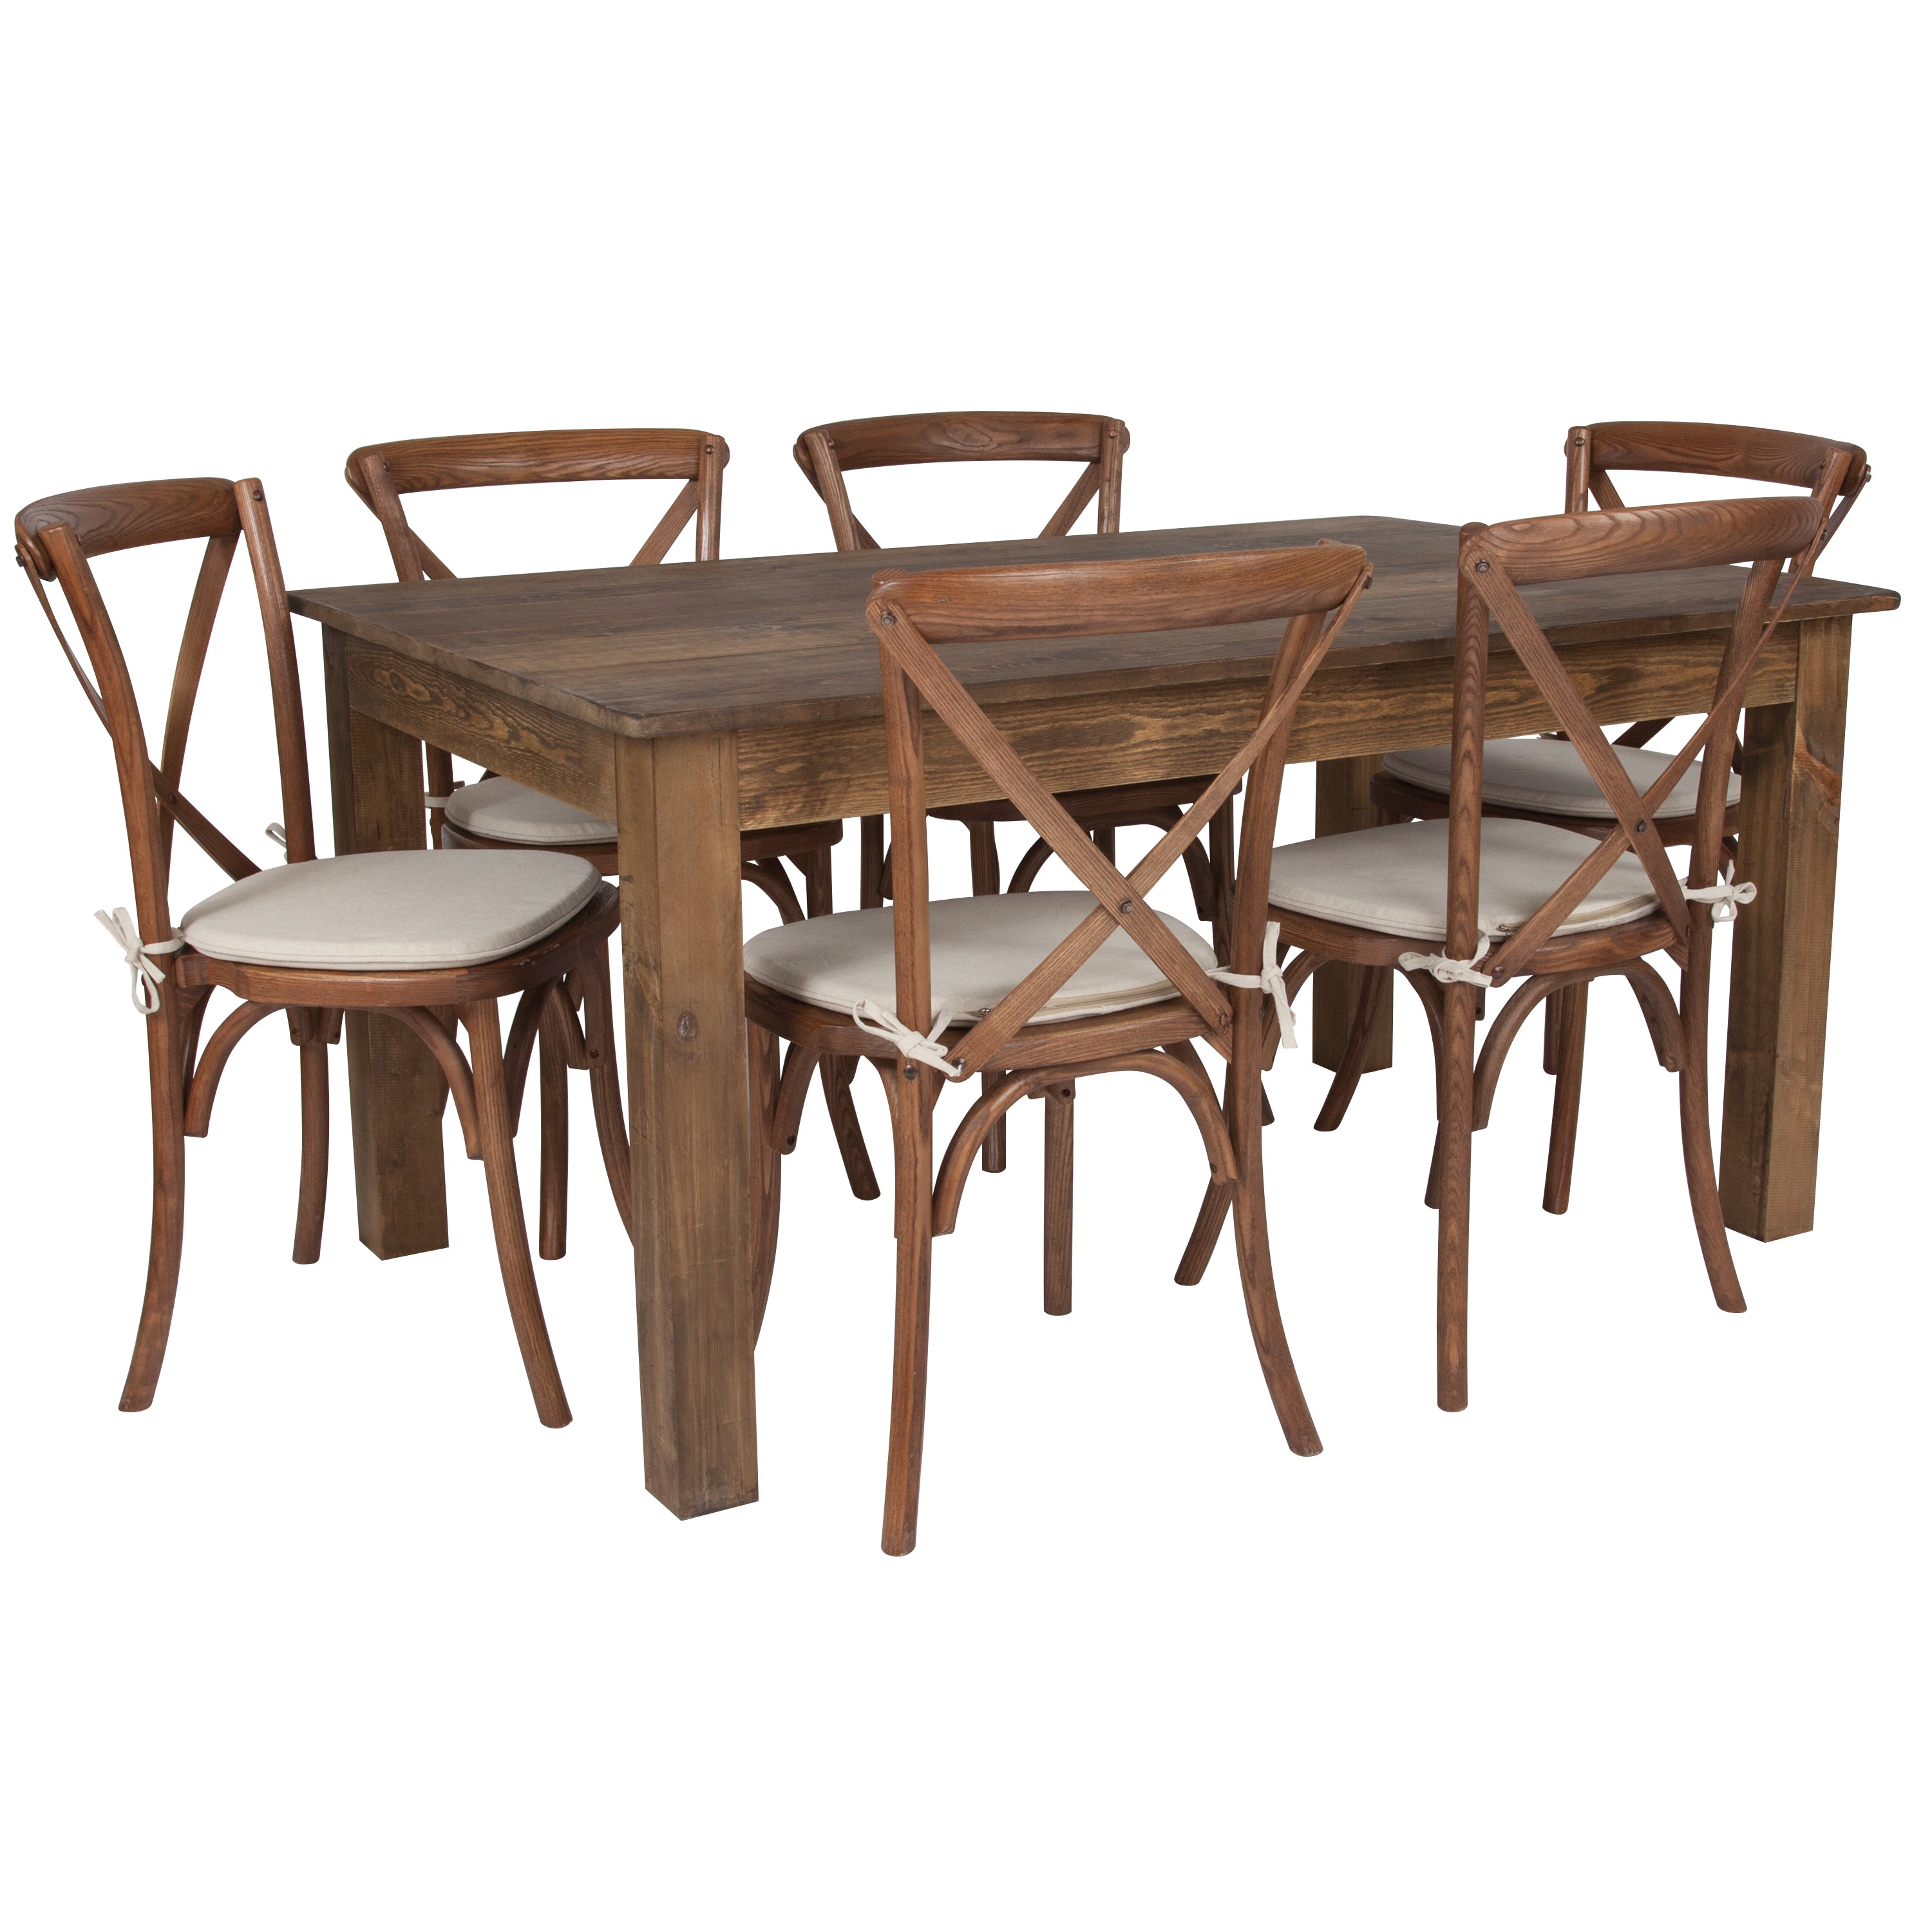 60" x 38" Farm Table Set with 6 Cross Back Chairs and Cushions-Dining Room Set-Flash Furniture-Wall2Wall Furnishings